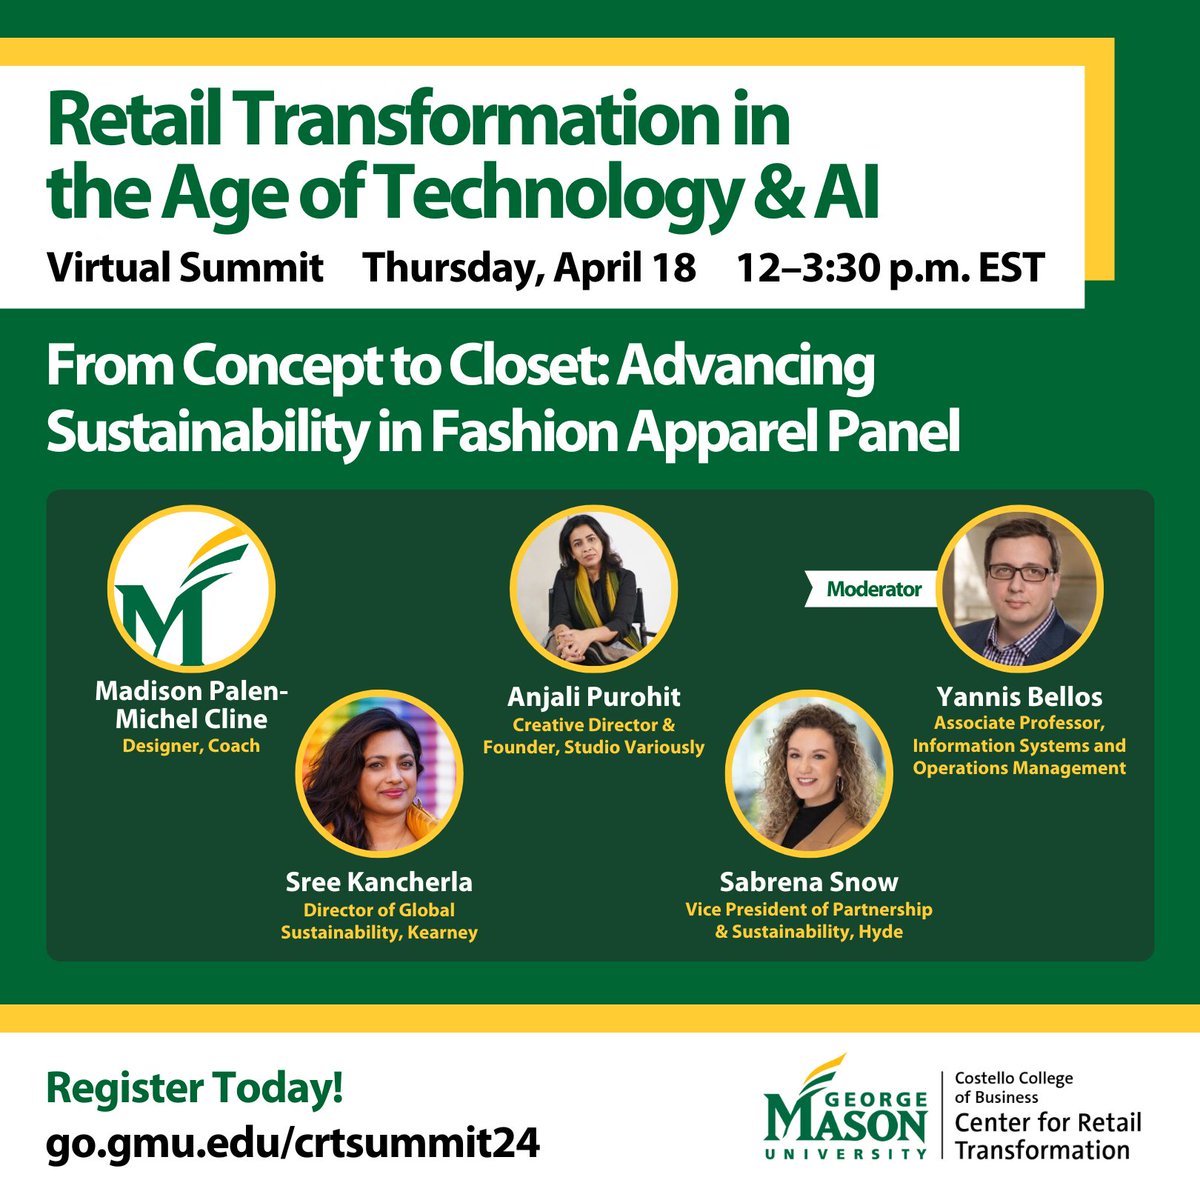 Join @GmuRetail tomorrow for their 2024 Annual Virtual Summit! It will address retail’s evolving landscape with industry leaders discussing a range of new opportunities, challenges, emerging technologies and innovations go.gmu.edu/crtsummit24 #CostelloMeansBusiness